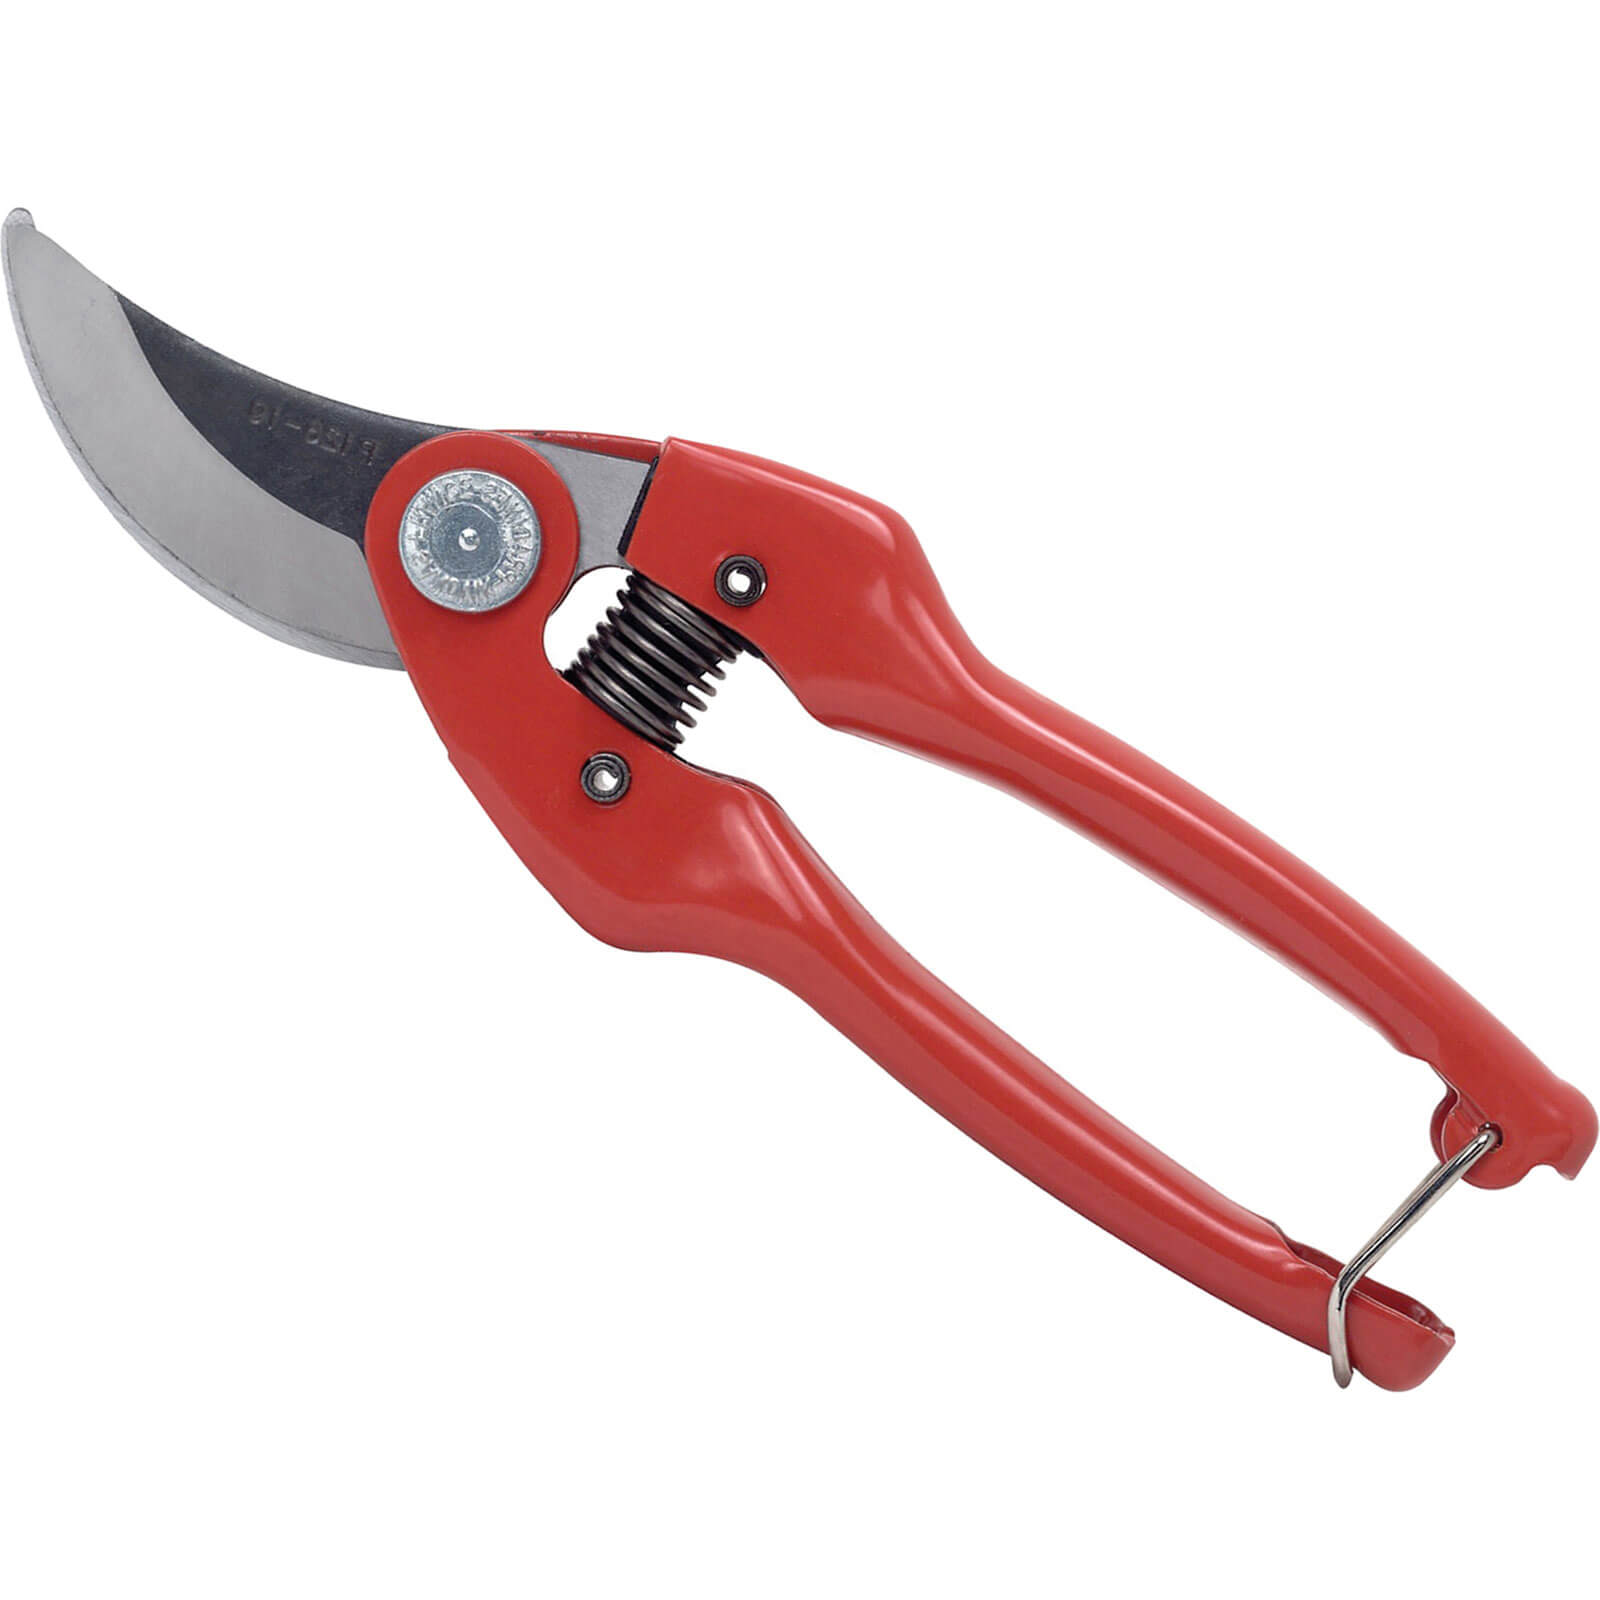 Bahco Bypass Secateurs 190mm Long 15mm Capacity